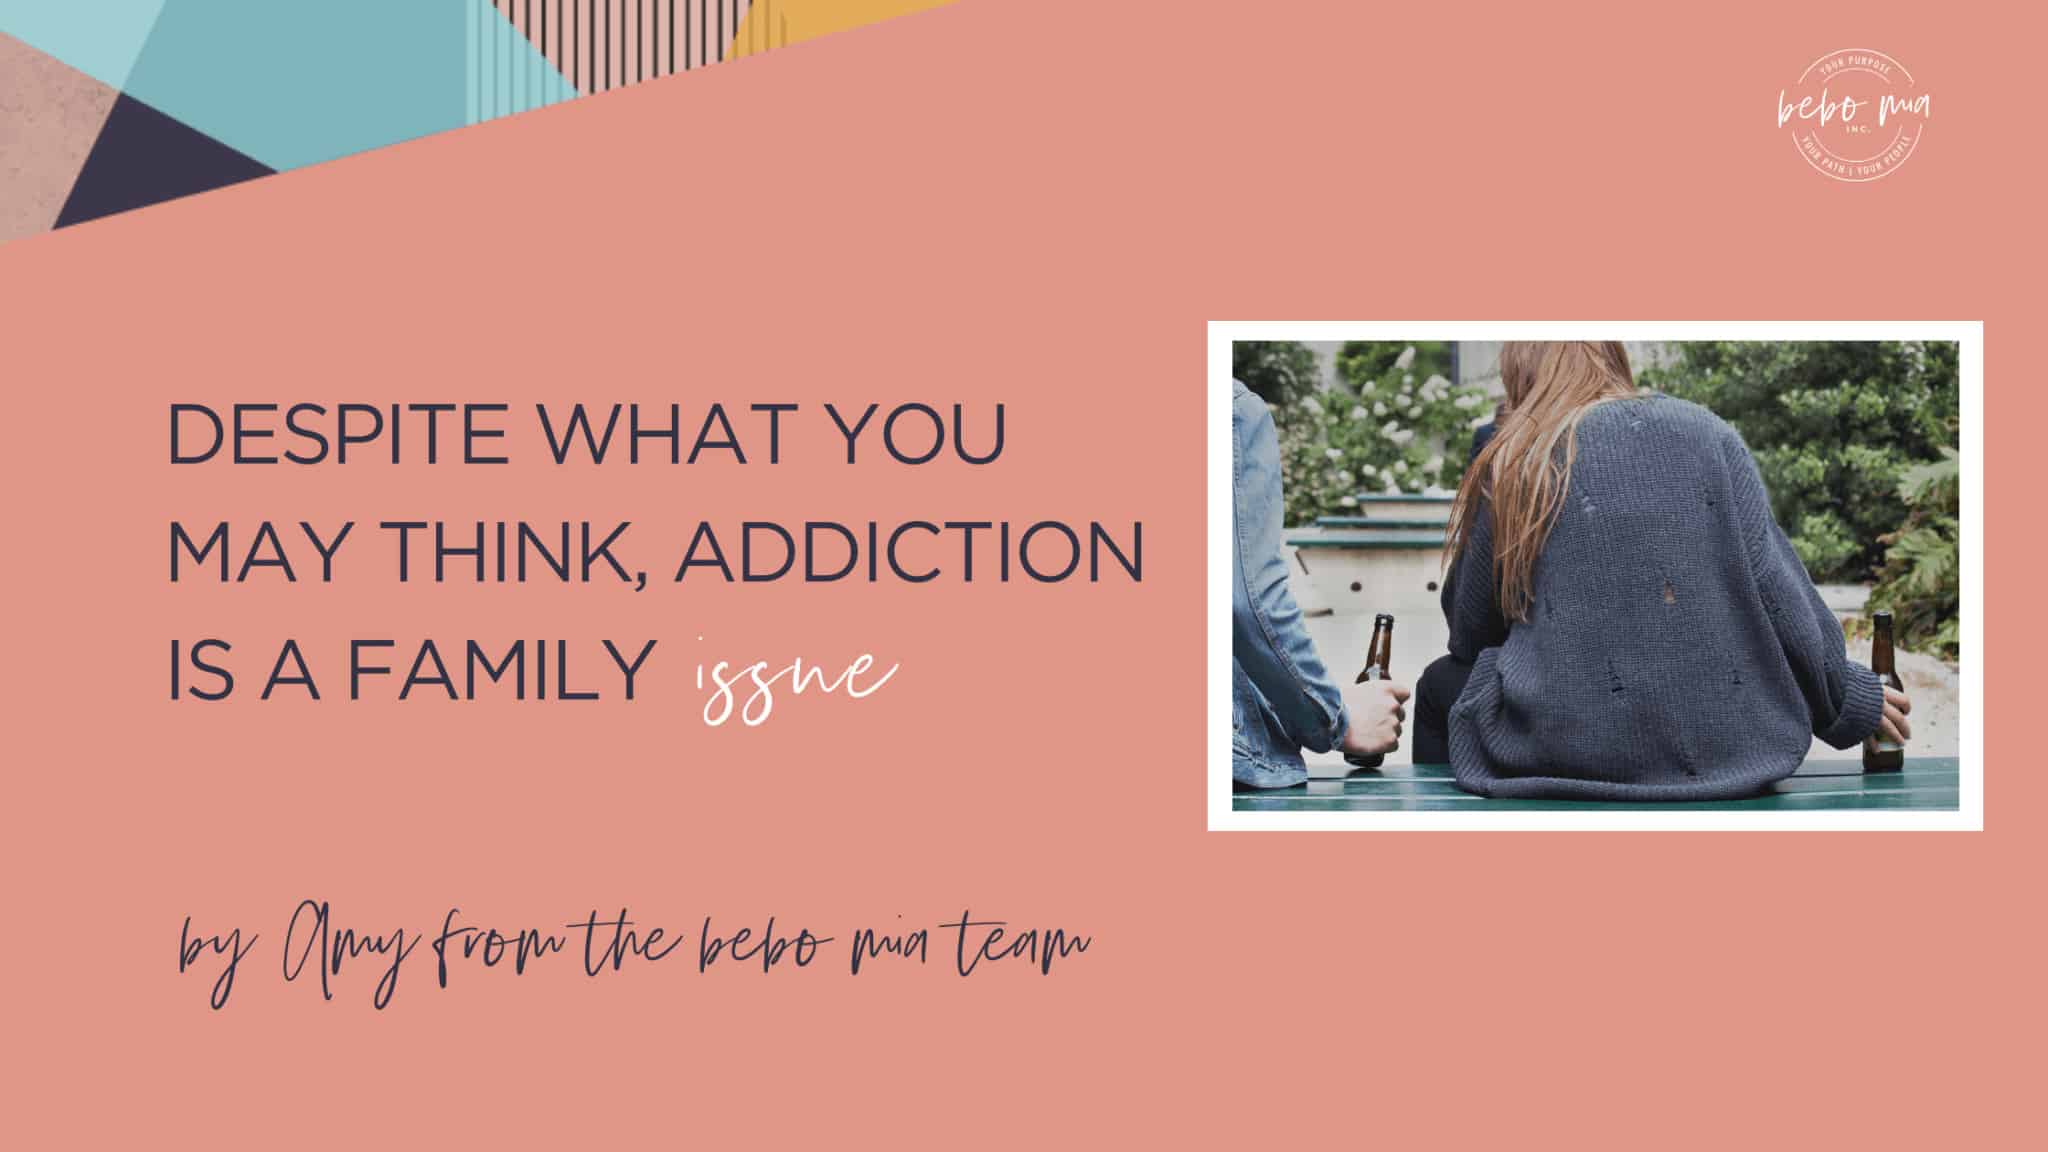 Addiction is a family issue